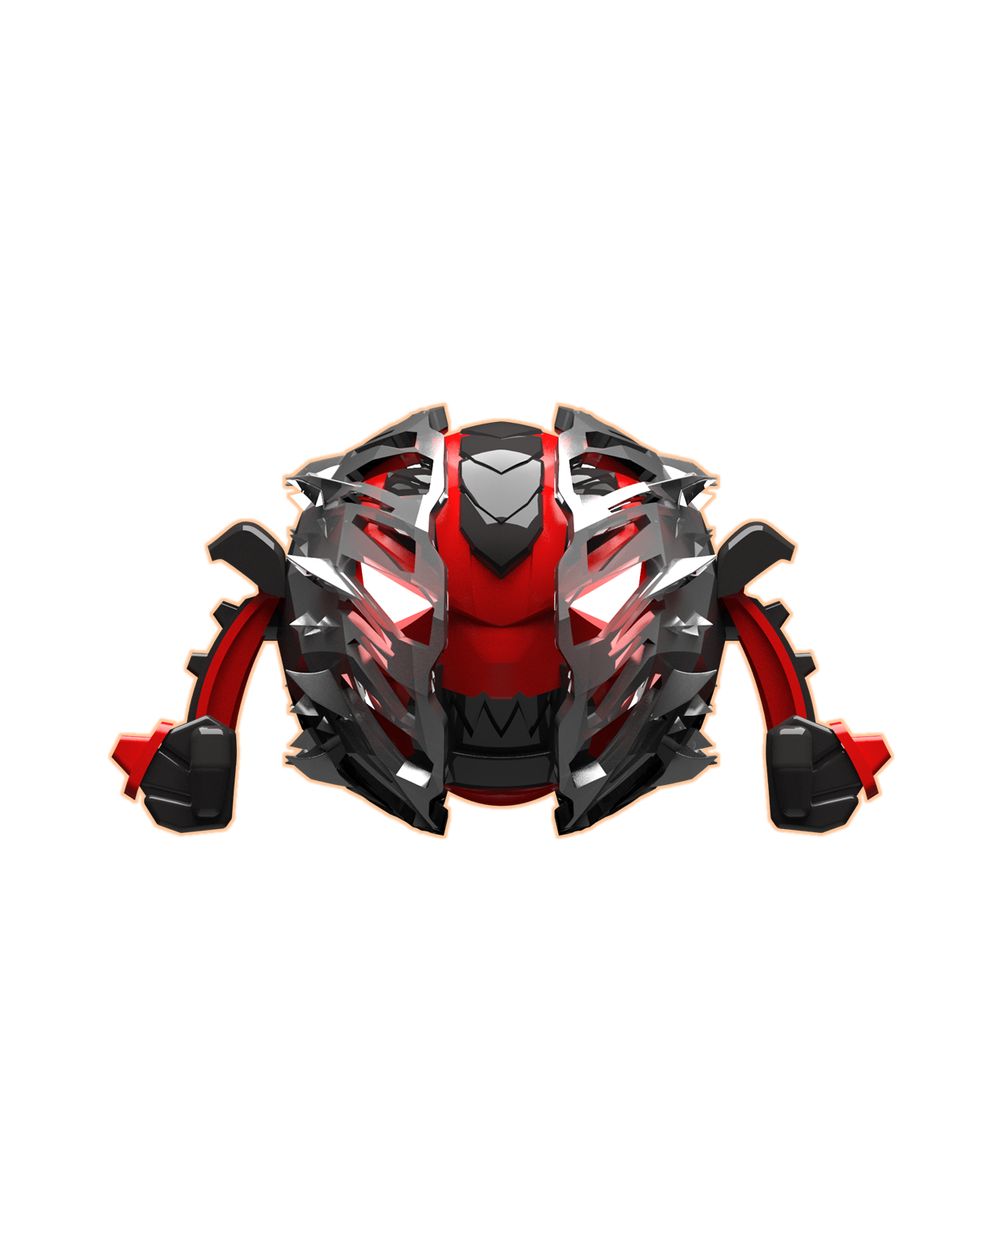 Grrrumball Remote Control Vehicle Black & Red 2020 Toy of The Year Finalist for sale online 